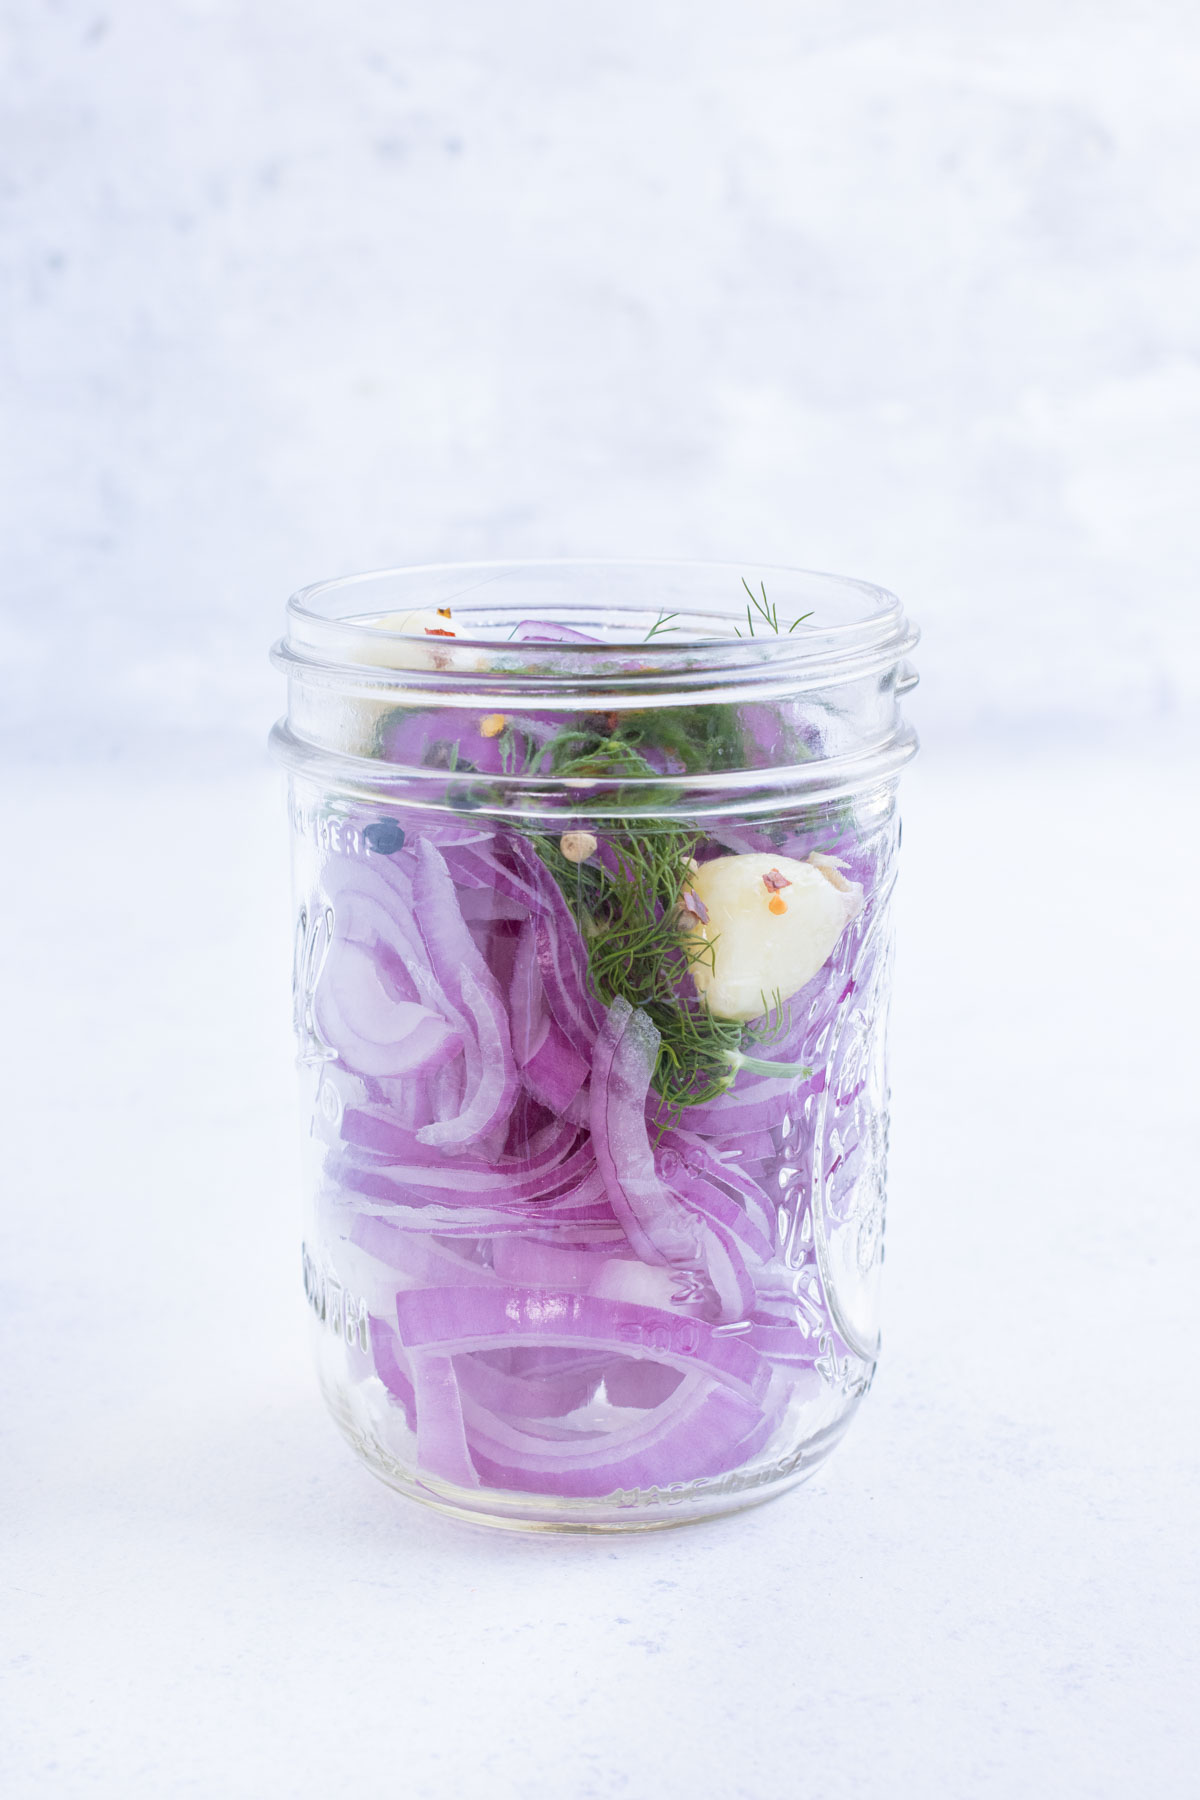 A jar is filled with sliced onions, garlic, and herbs.